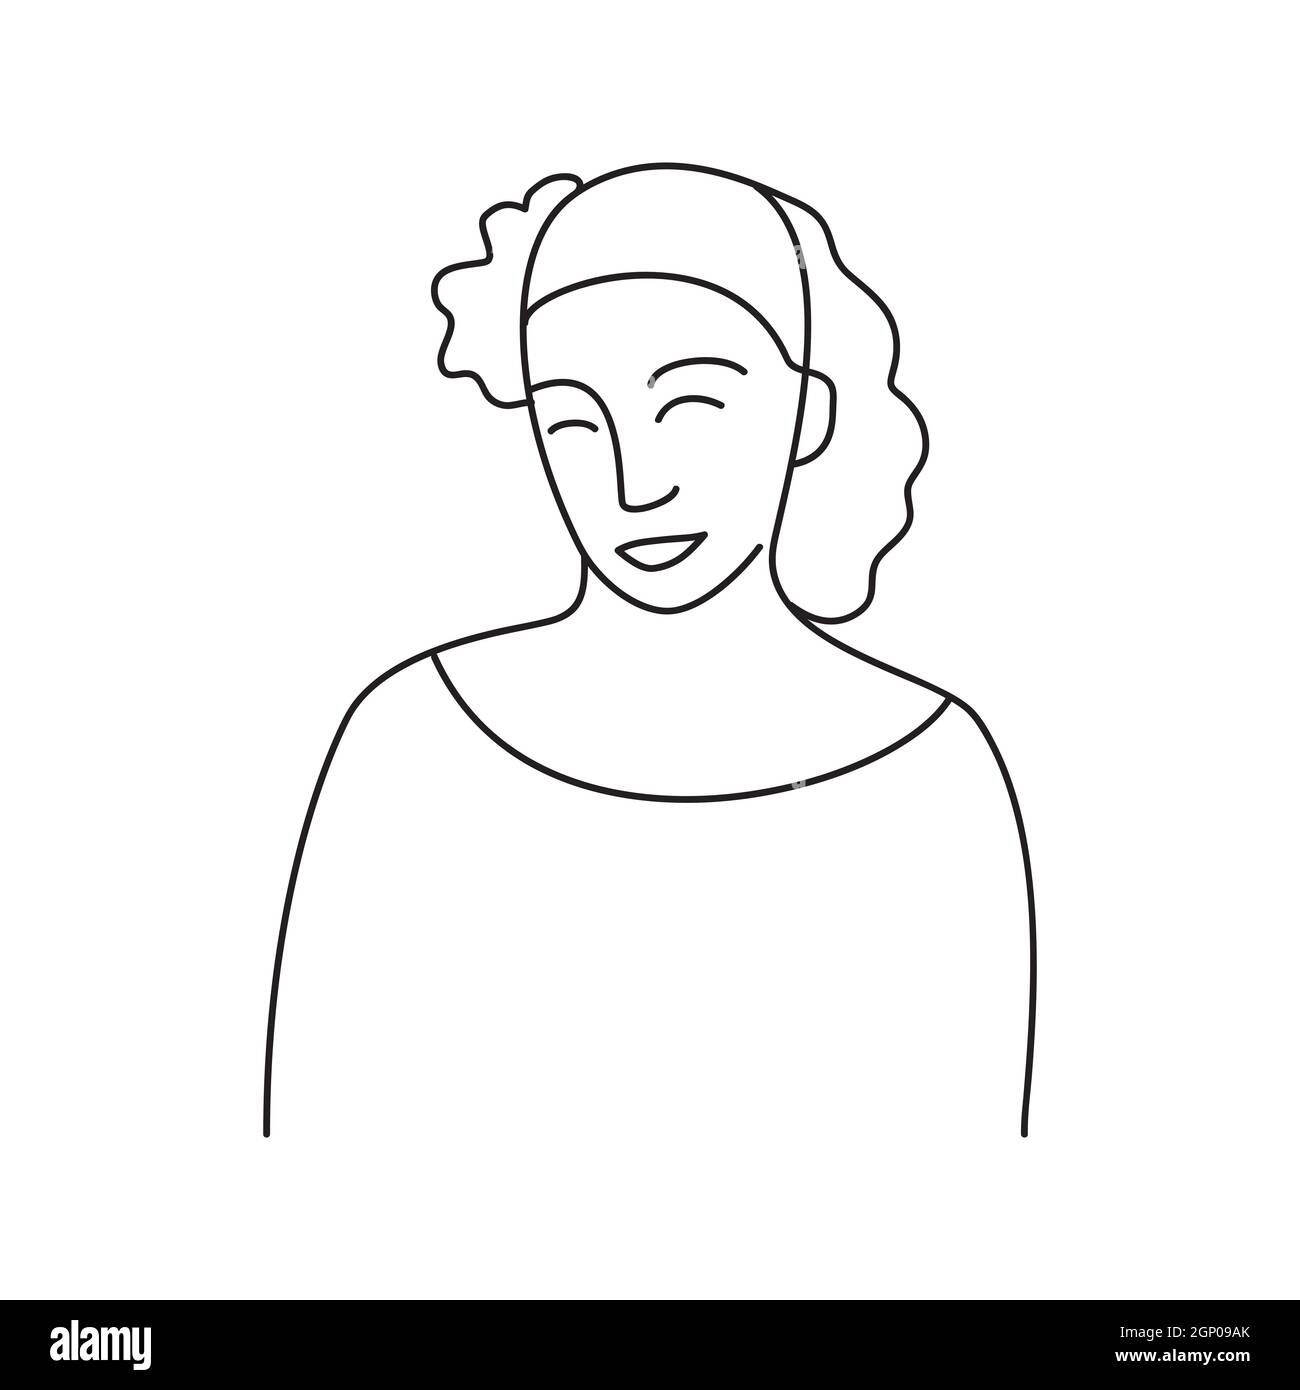 Minimalism Hand Drawn Female Vector Portrait In Modern Abstract One Line  Drawing Graphic Style (View 20 of 20)